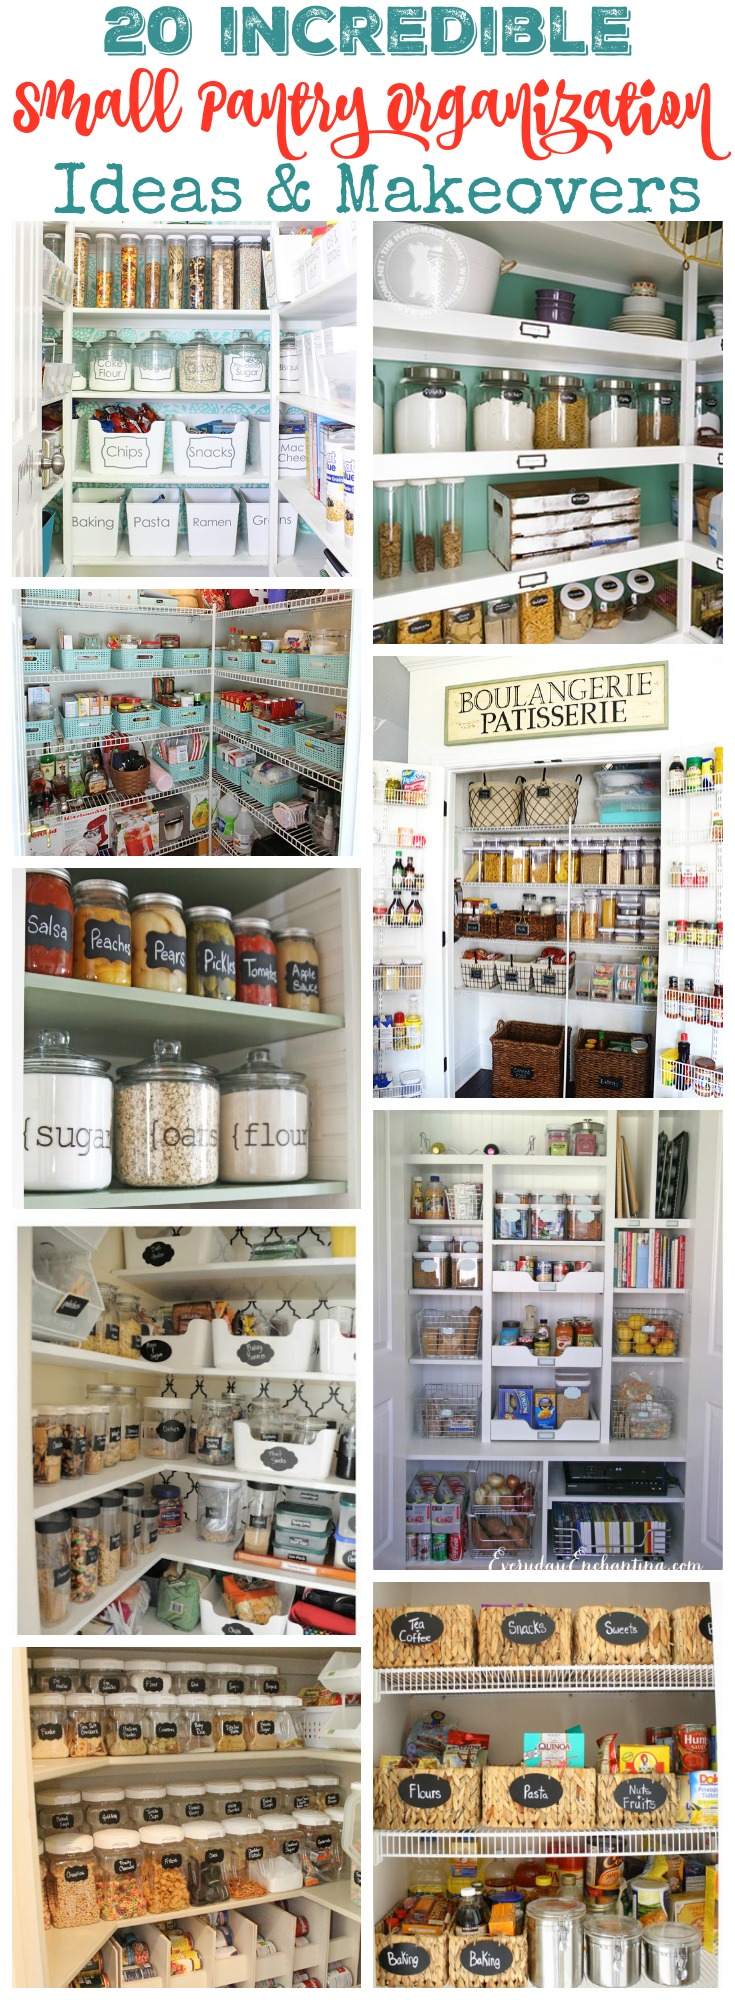 20 Incredible Small Pantry Ideas & Makeovers at thehappyhousie.com